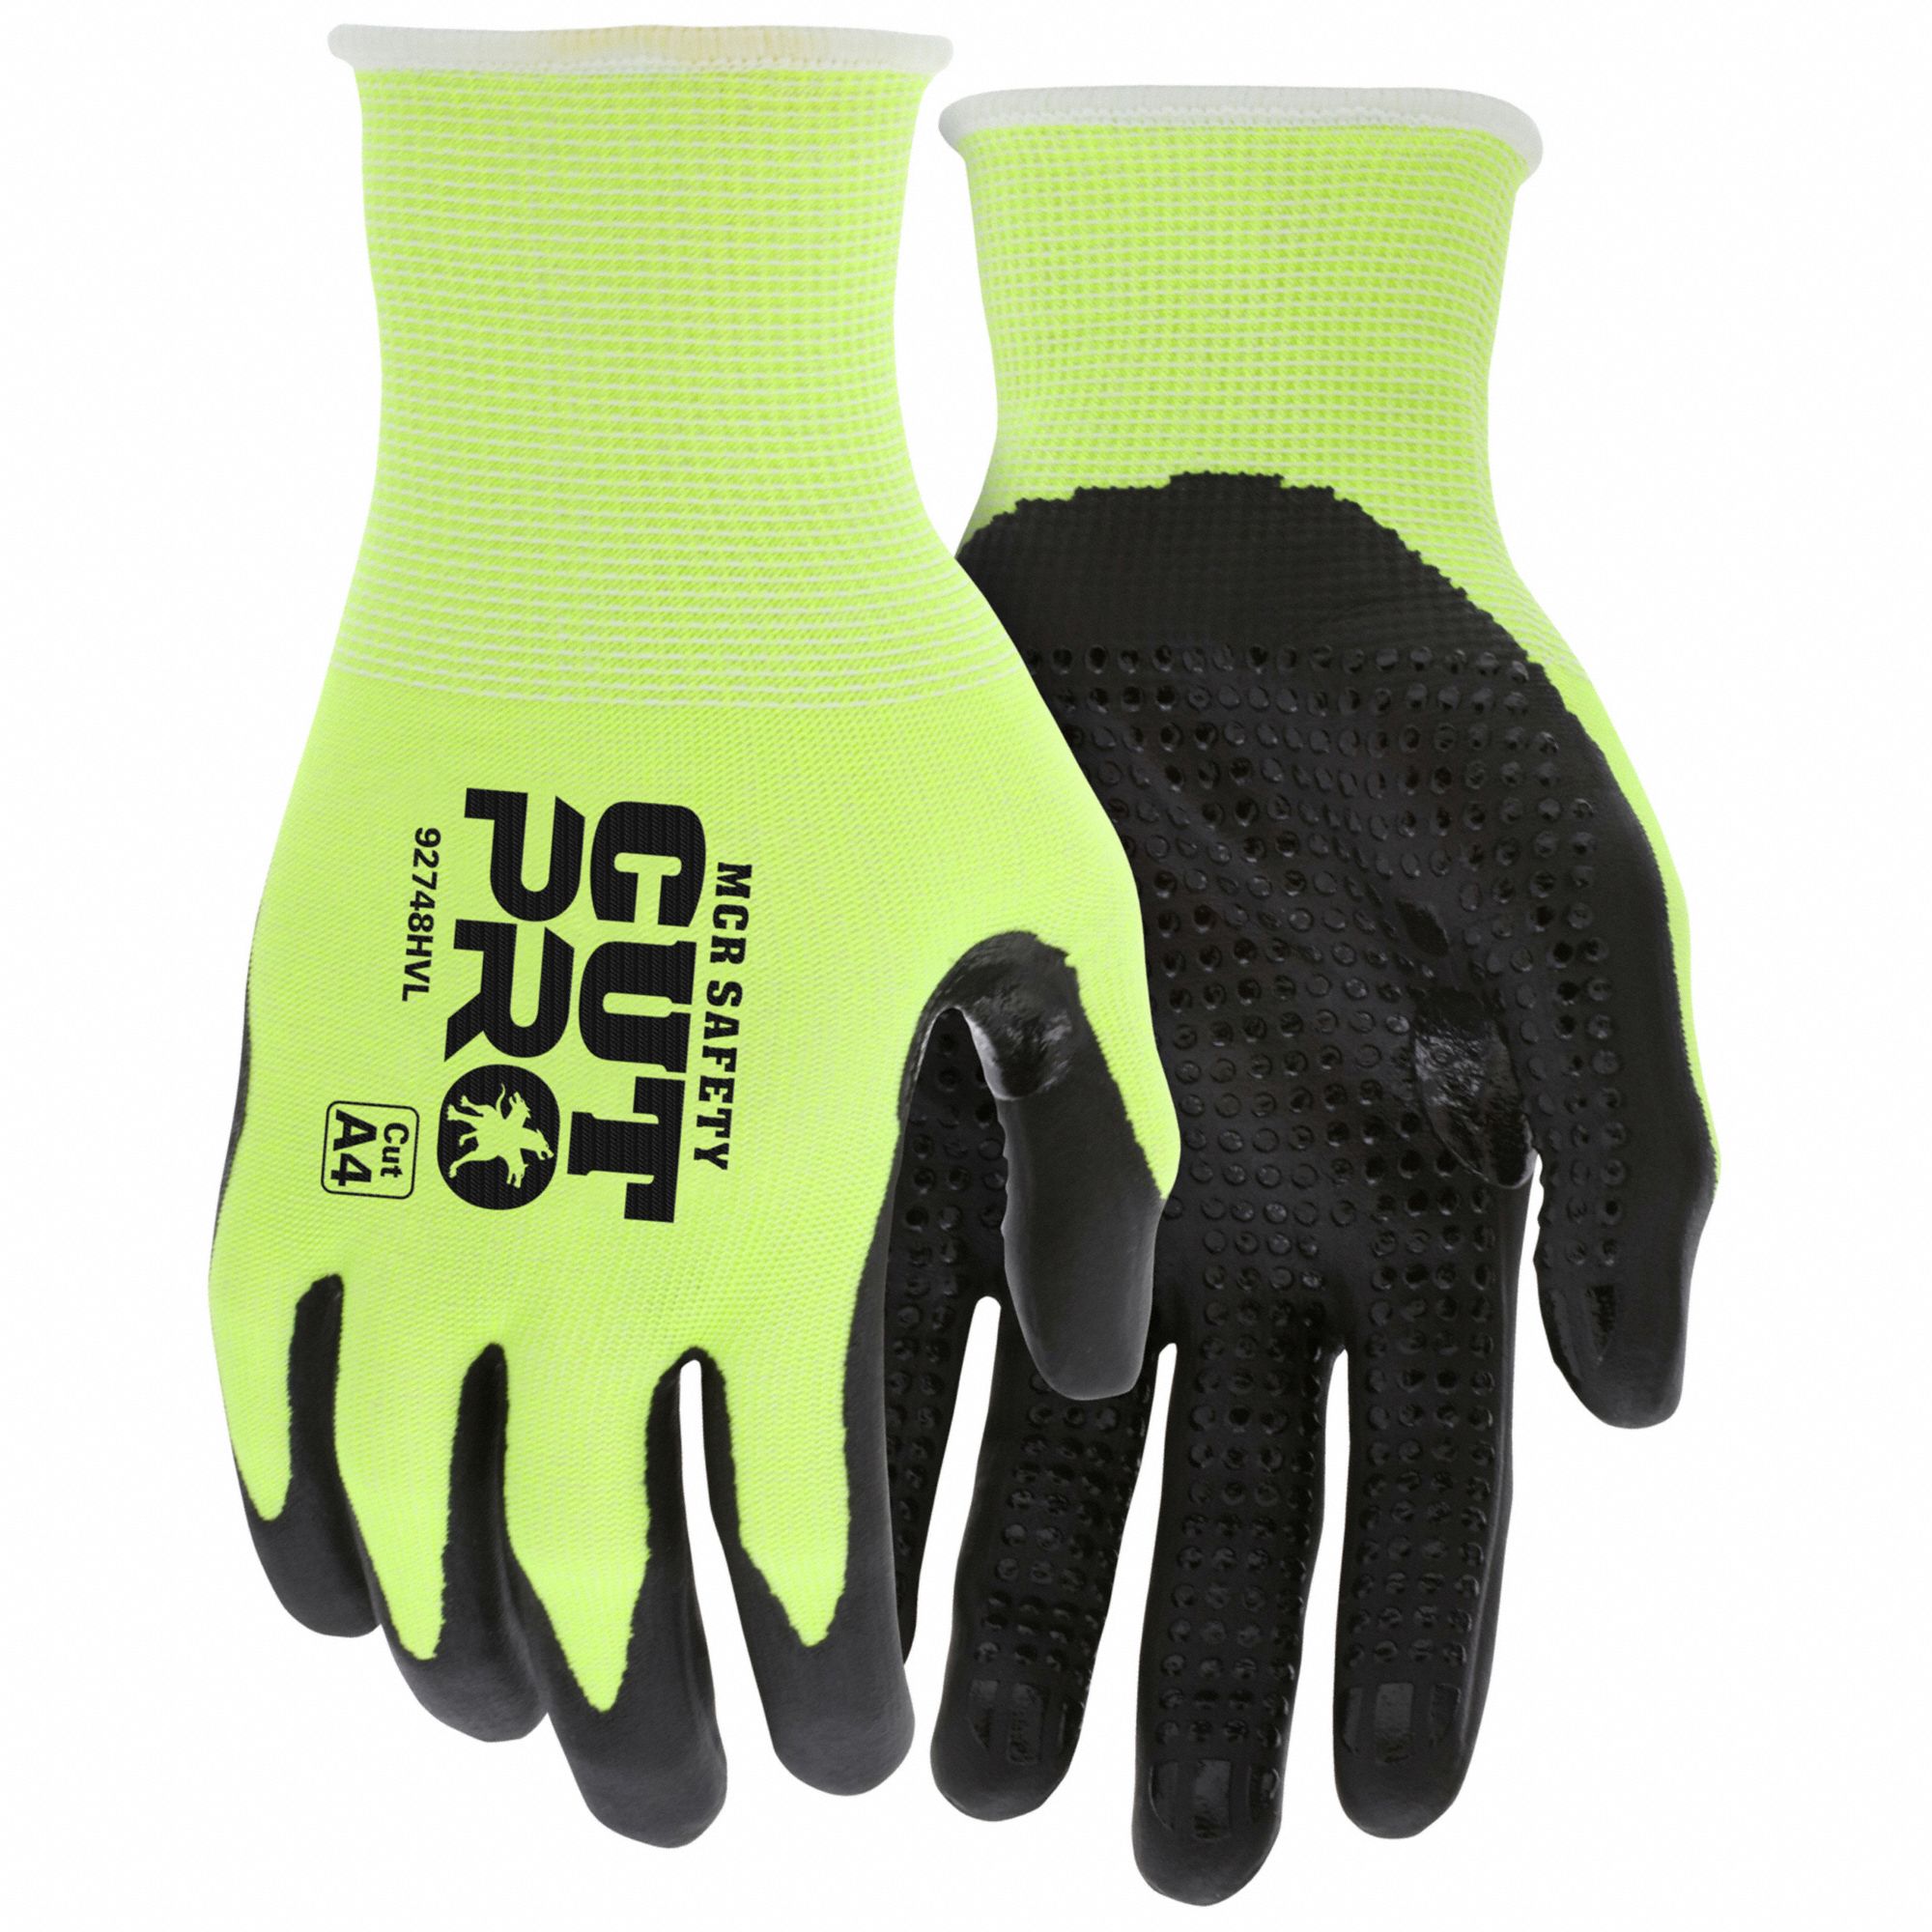 Coated Gloves: XL ( 10 ), ANSI Cut Level A4, Palm and Fingertips, Dotted, Nitrile, 1 PR